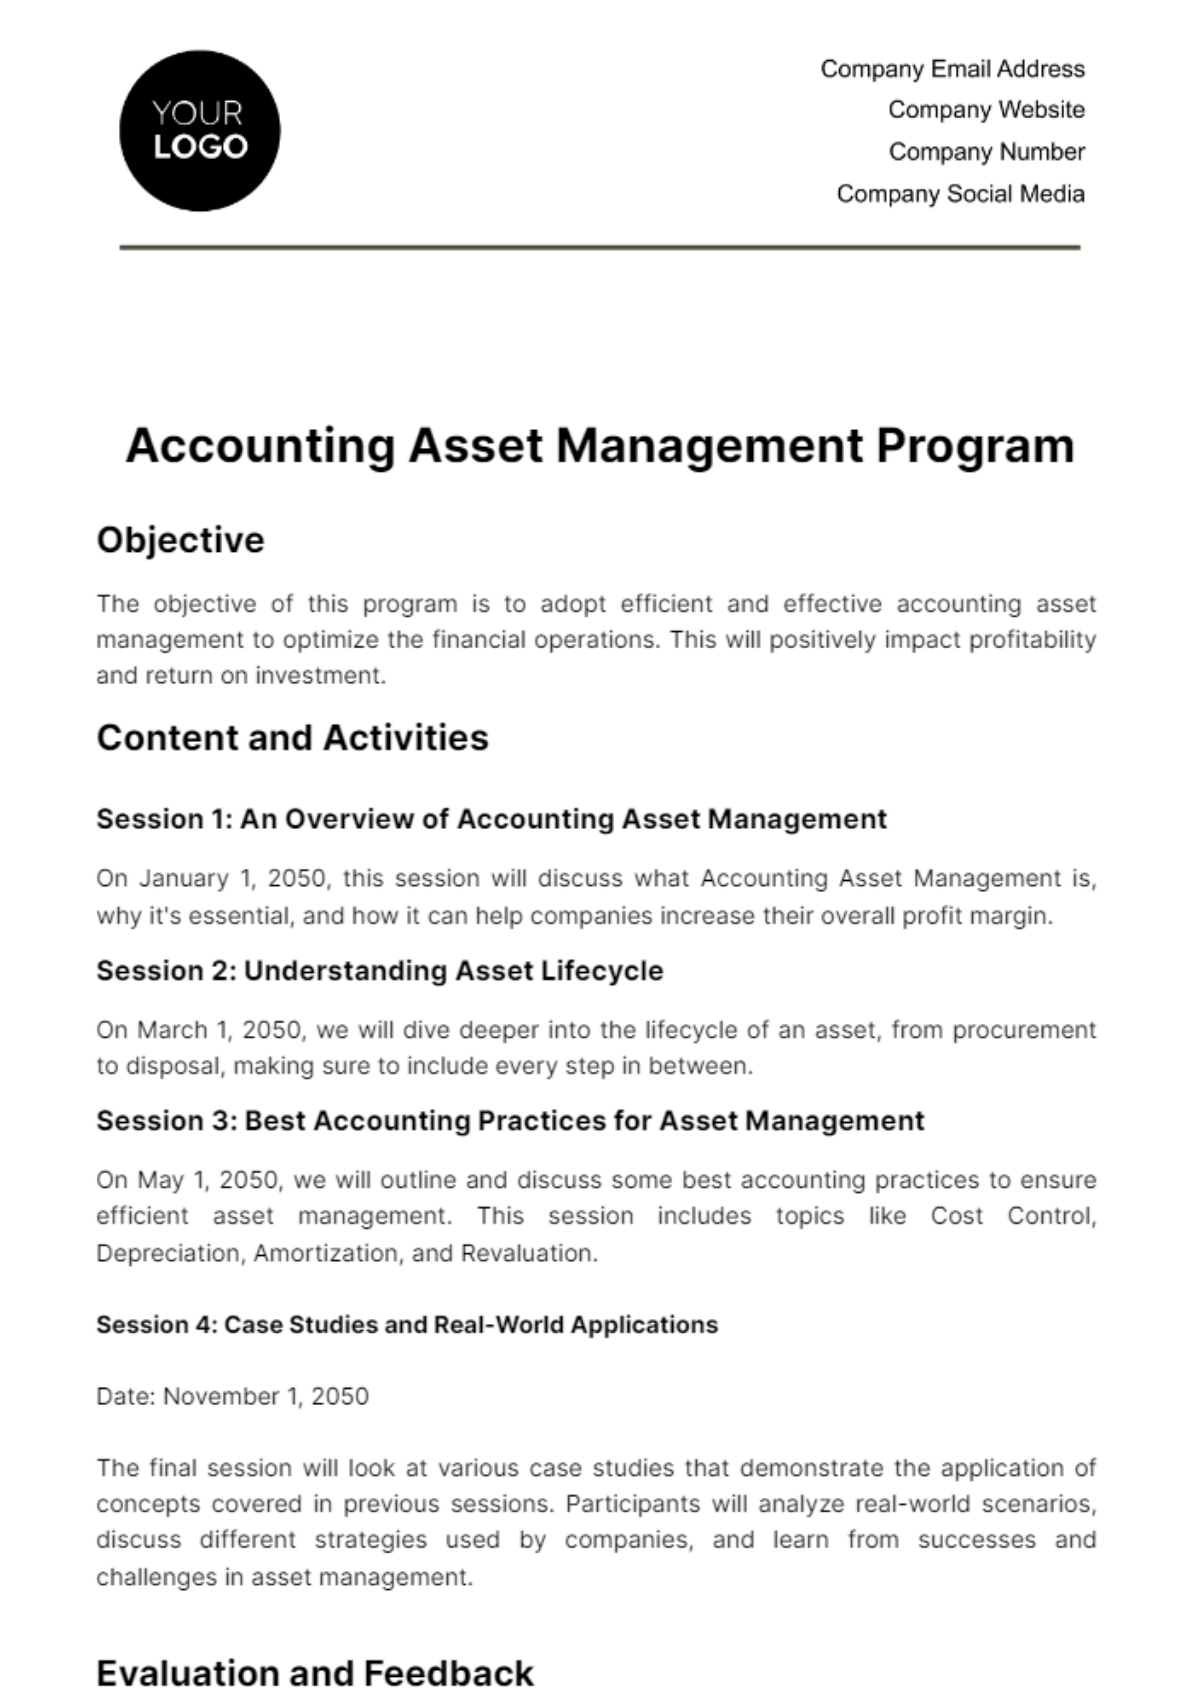 Free Accounting Asset Management Program Template